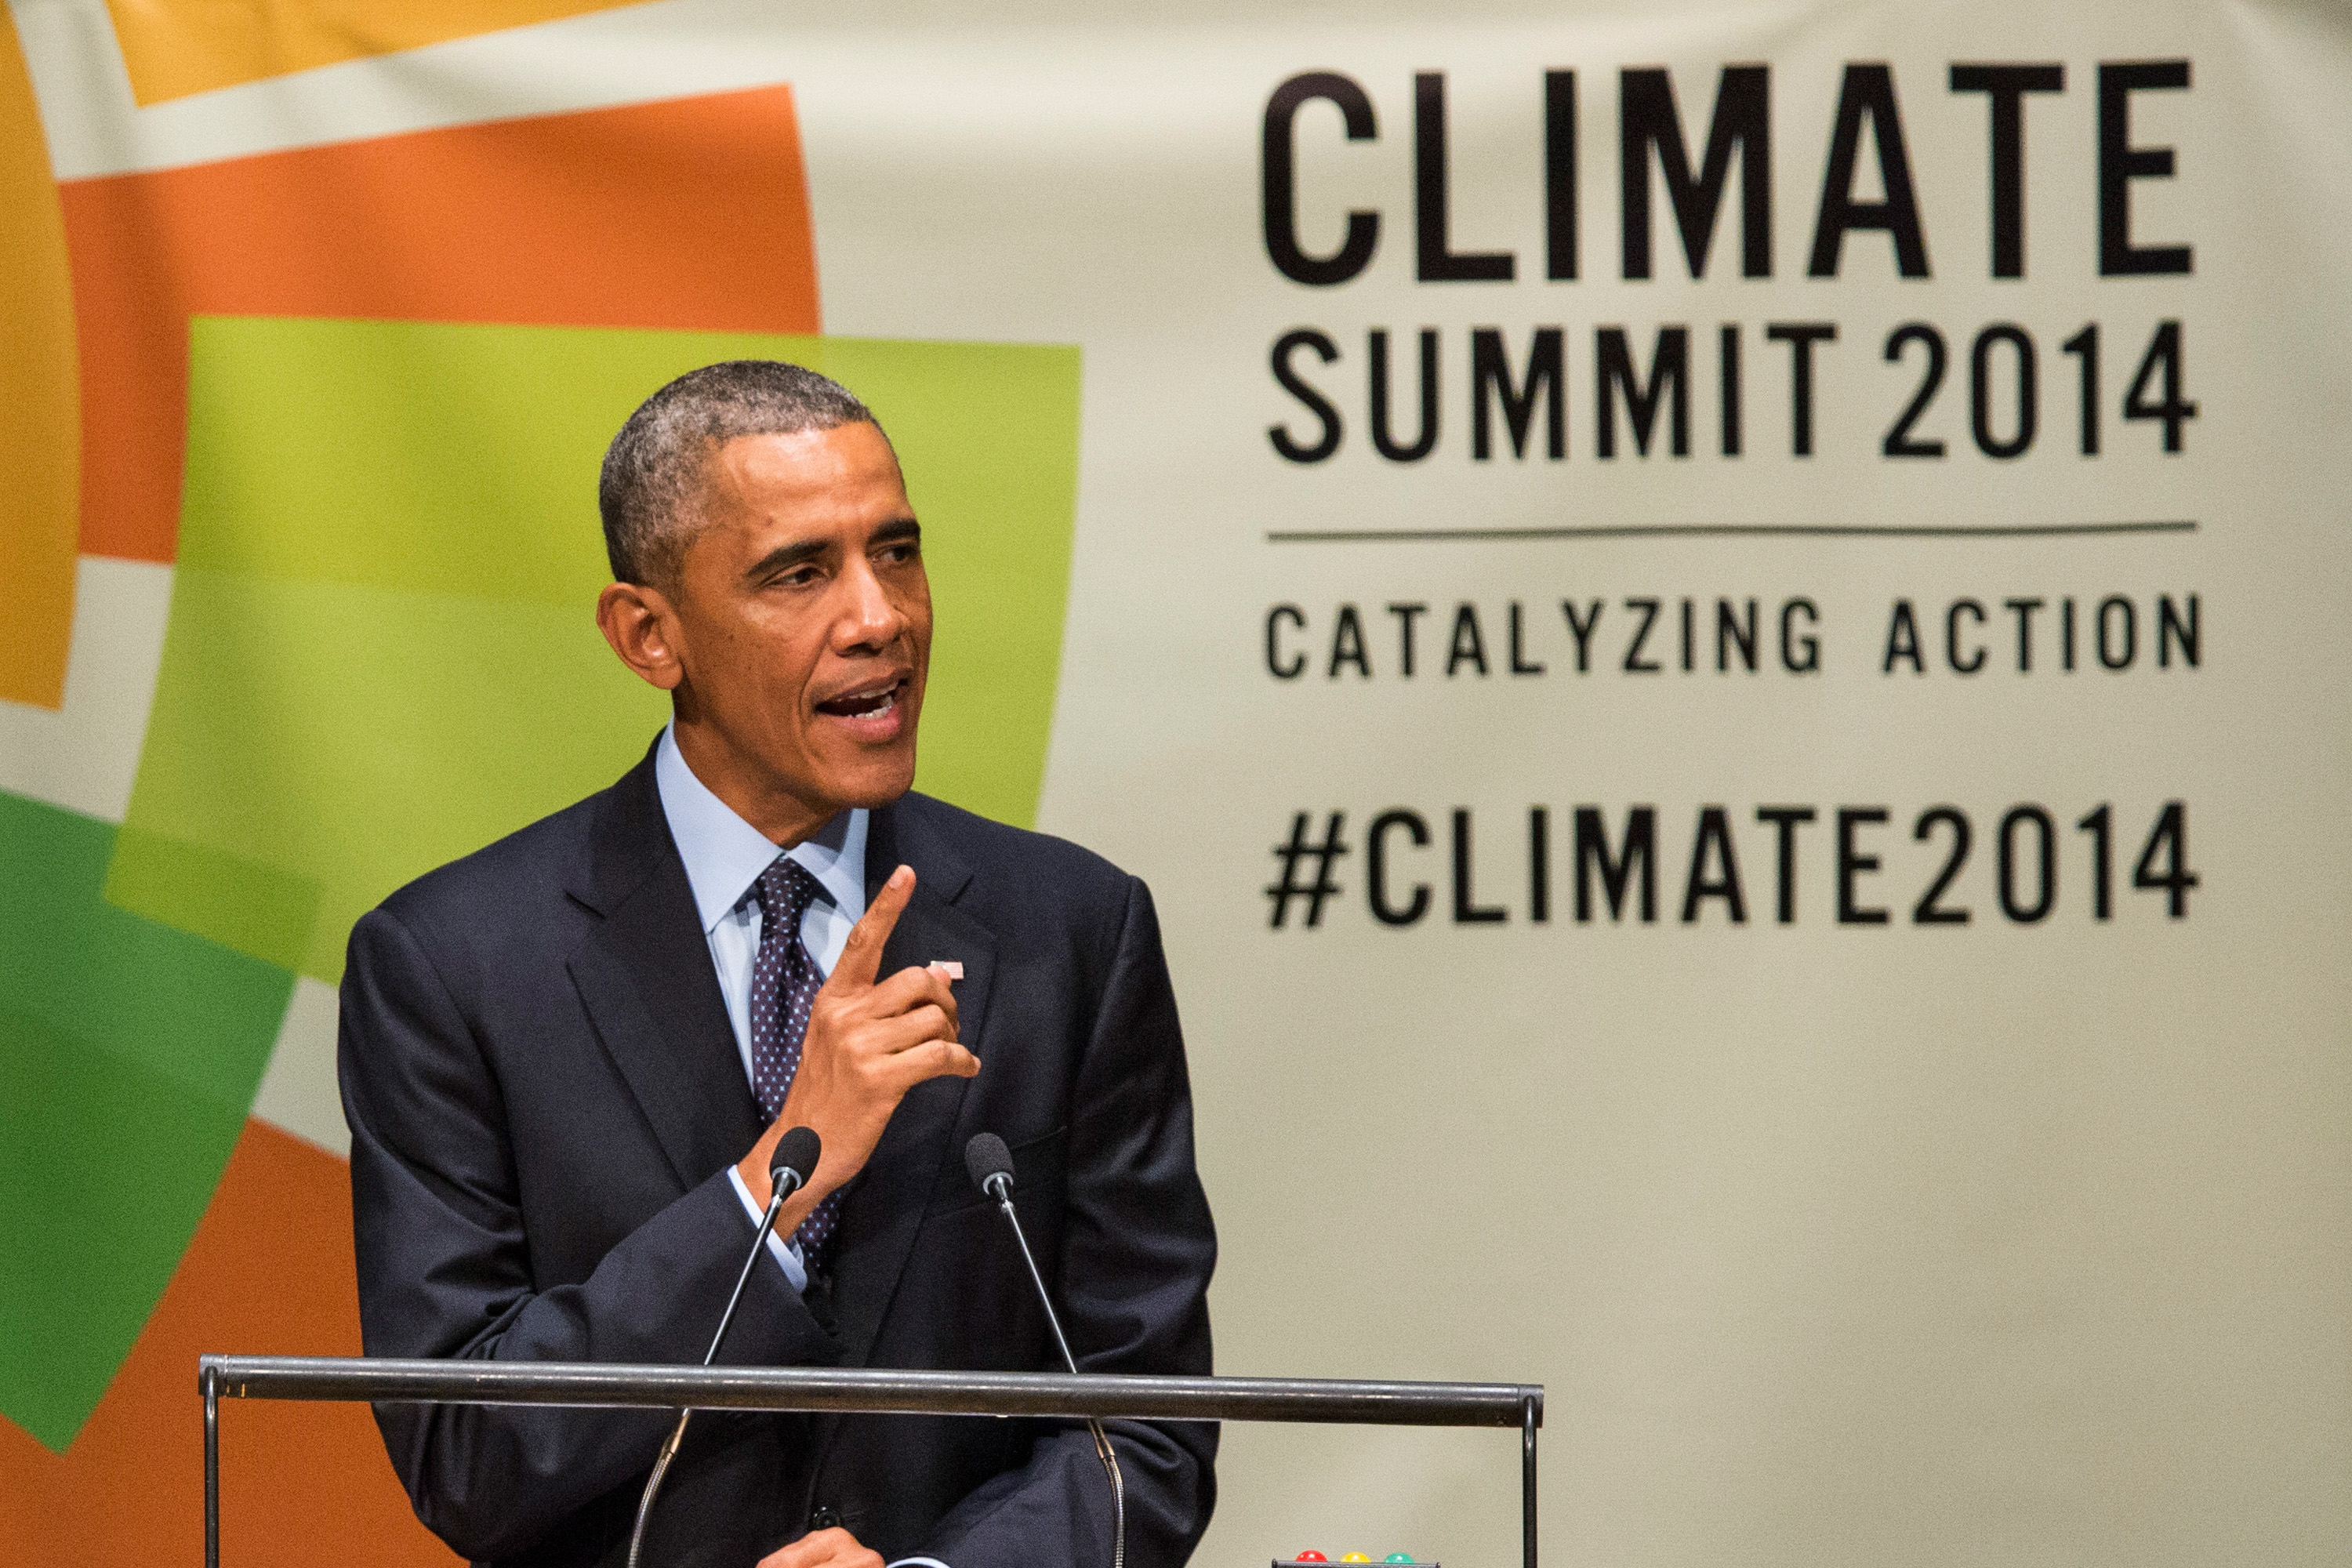 U.S. President Barack Obama speaks at the United Nations Climate Summit on September 23, 2014 in New York City. (Andrew Burton—Getty Images)